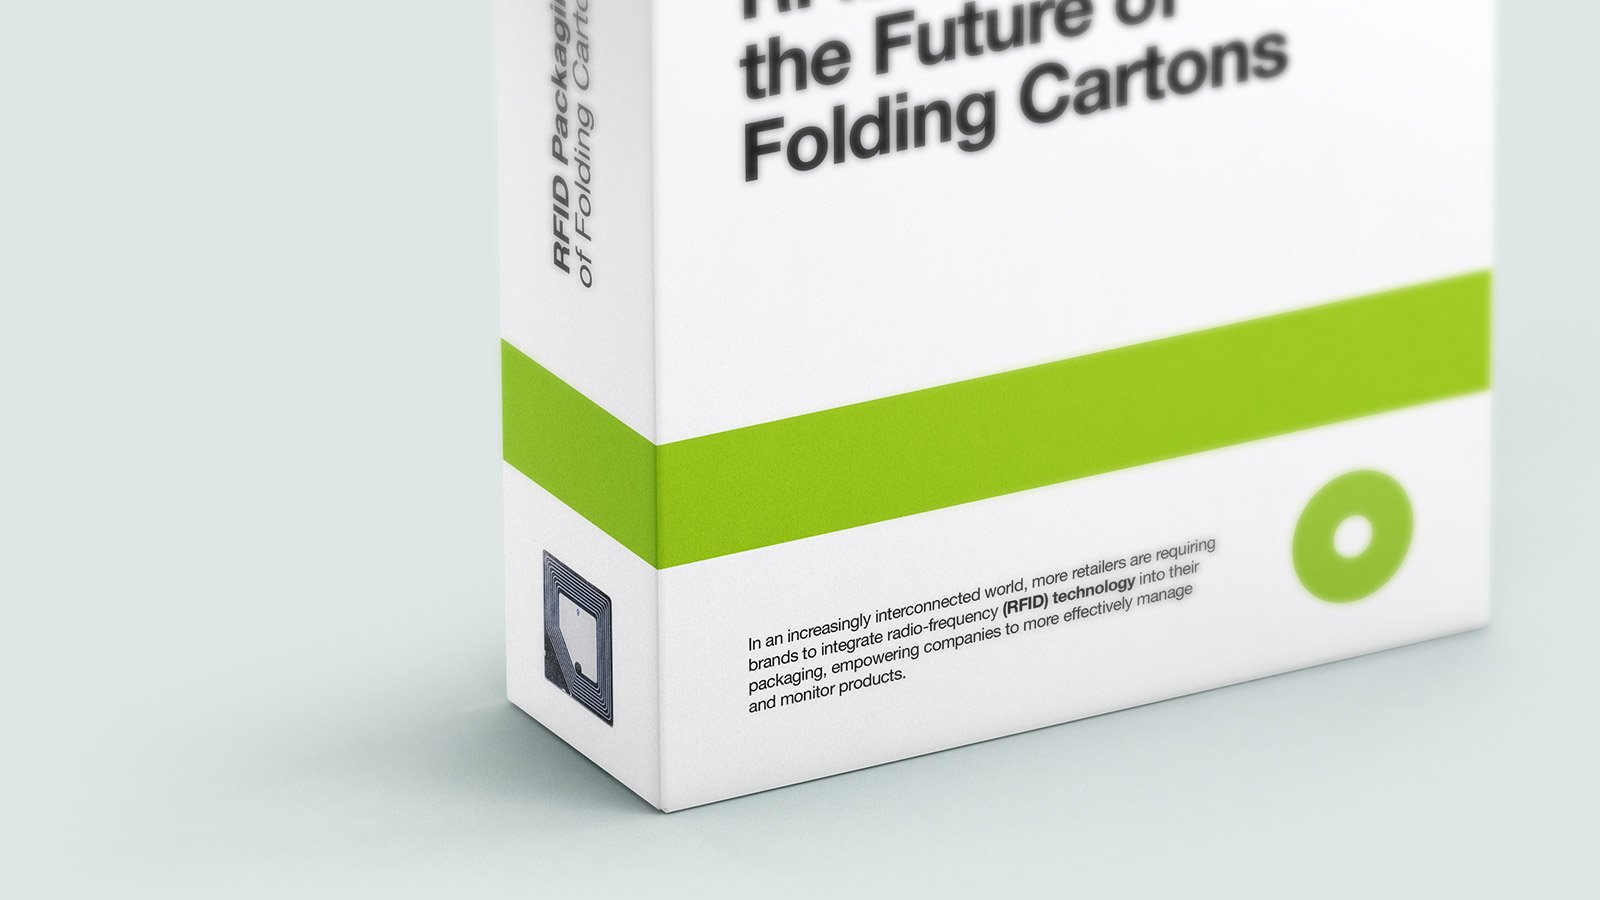 Oliver-Blog-RFID-Packaging-and-the-Future-of-Folding-Cartons